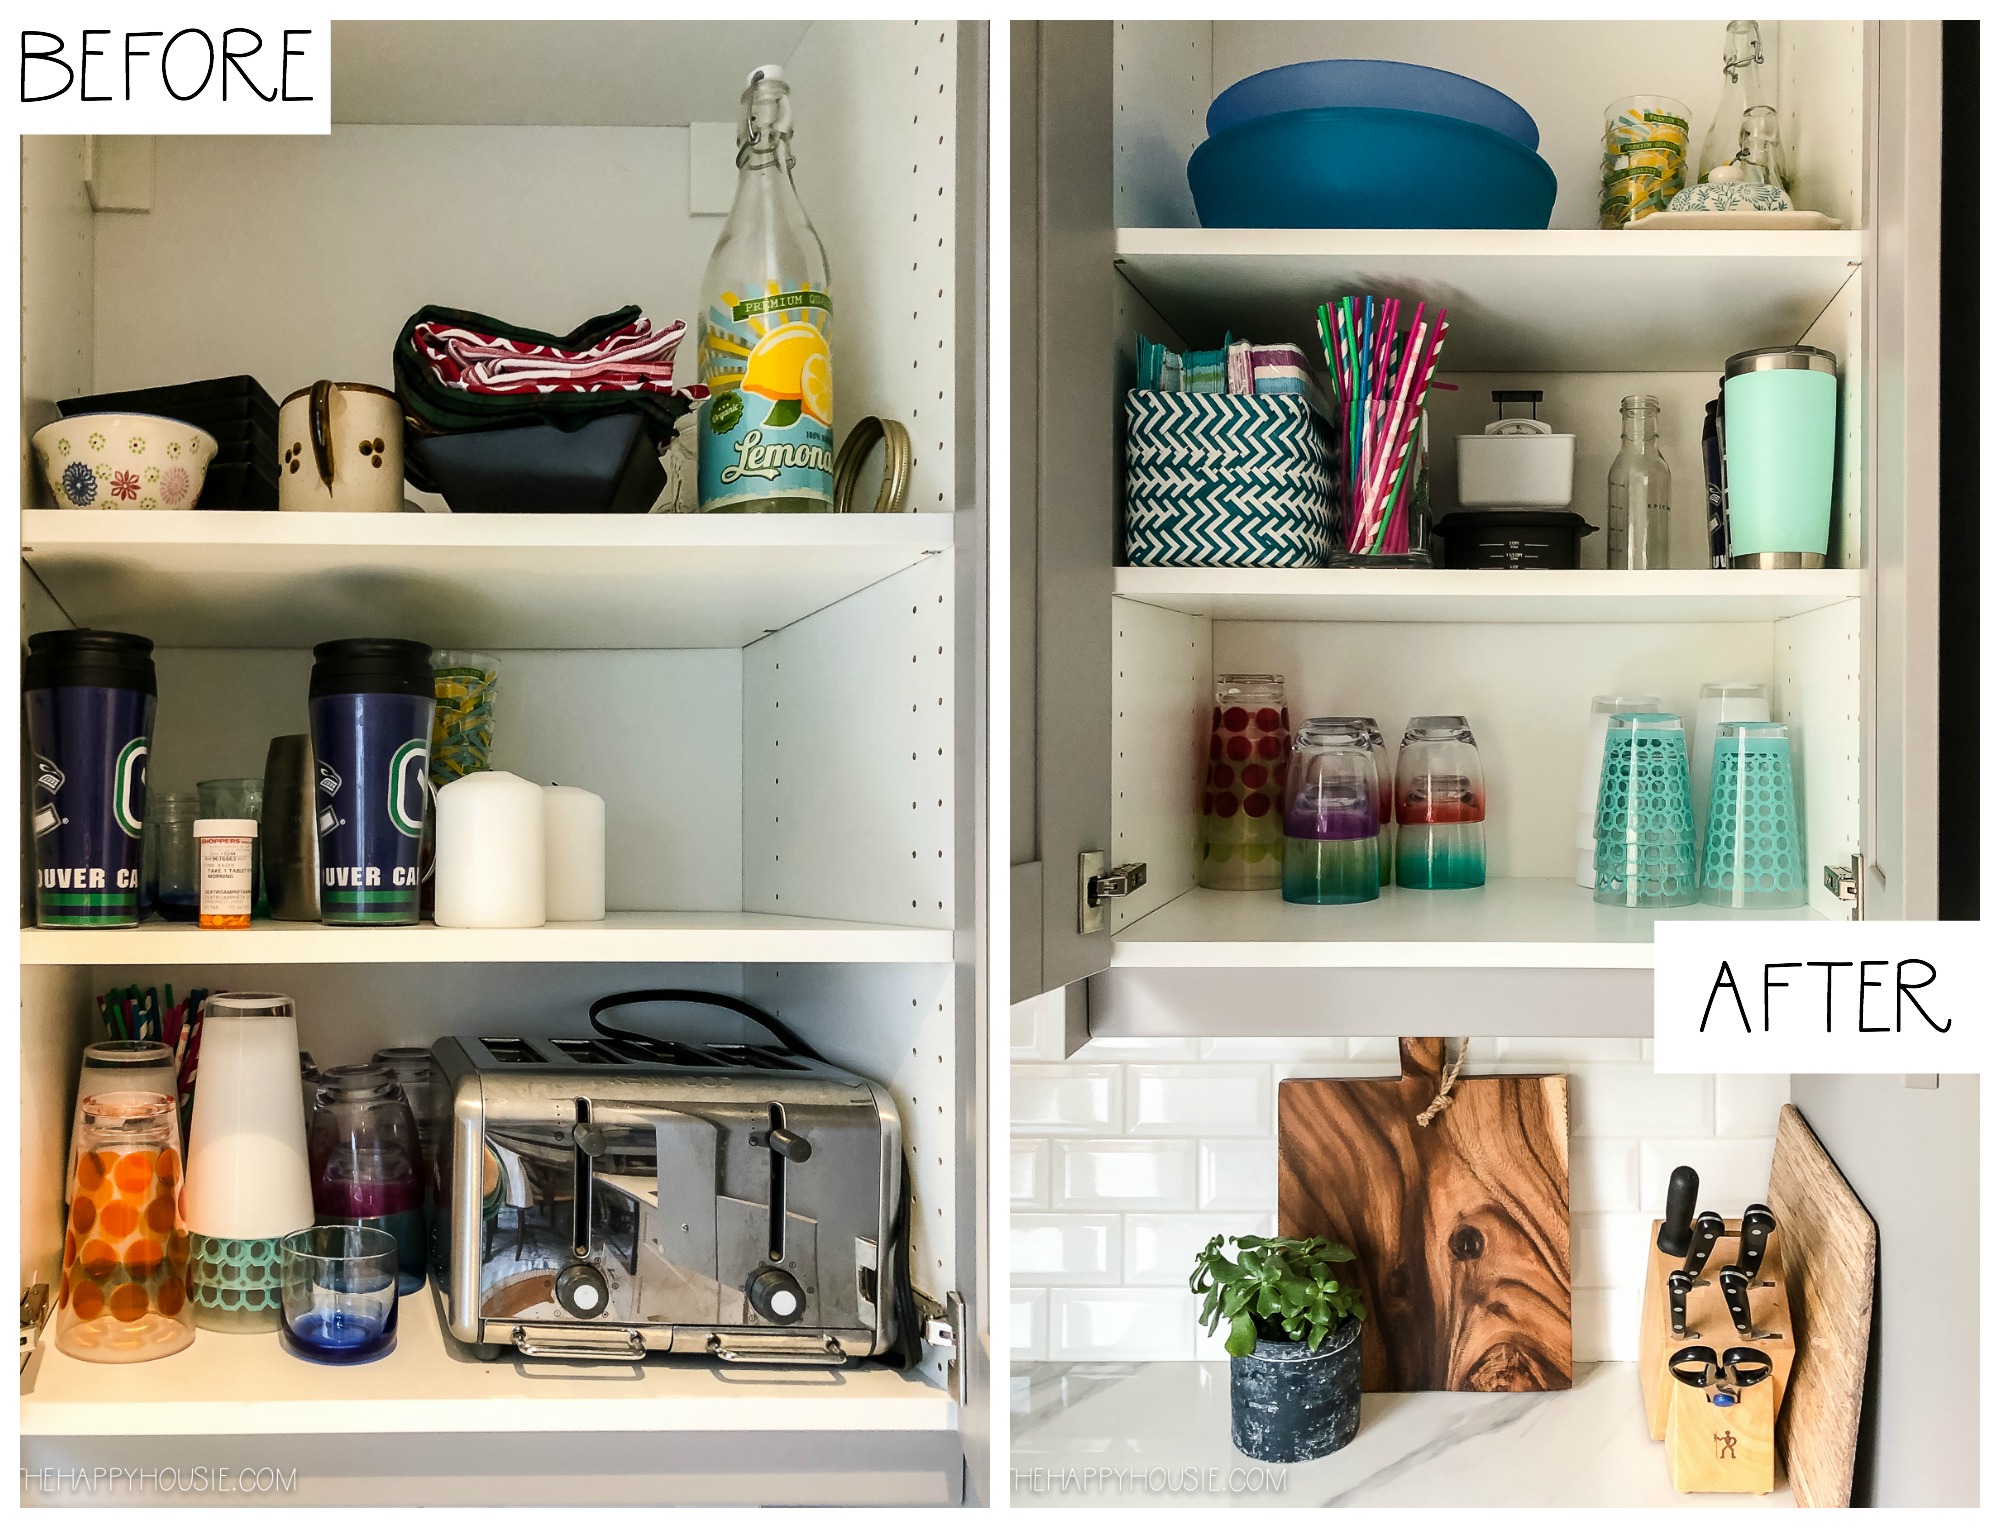 https://www.thehappyhousie.com/wp-content/uploads/2020/01/before-after-how-to-completely-organize-your-kitchen-cabinets-at-the-happy-housie.jpg